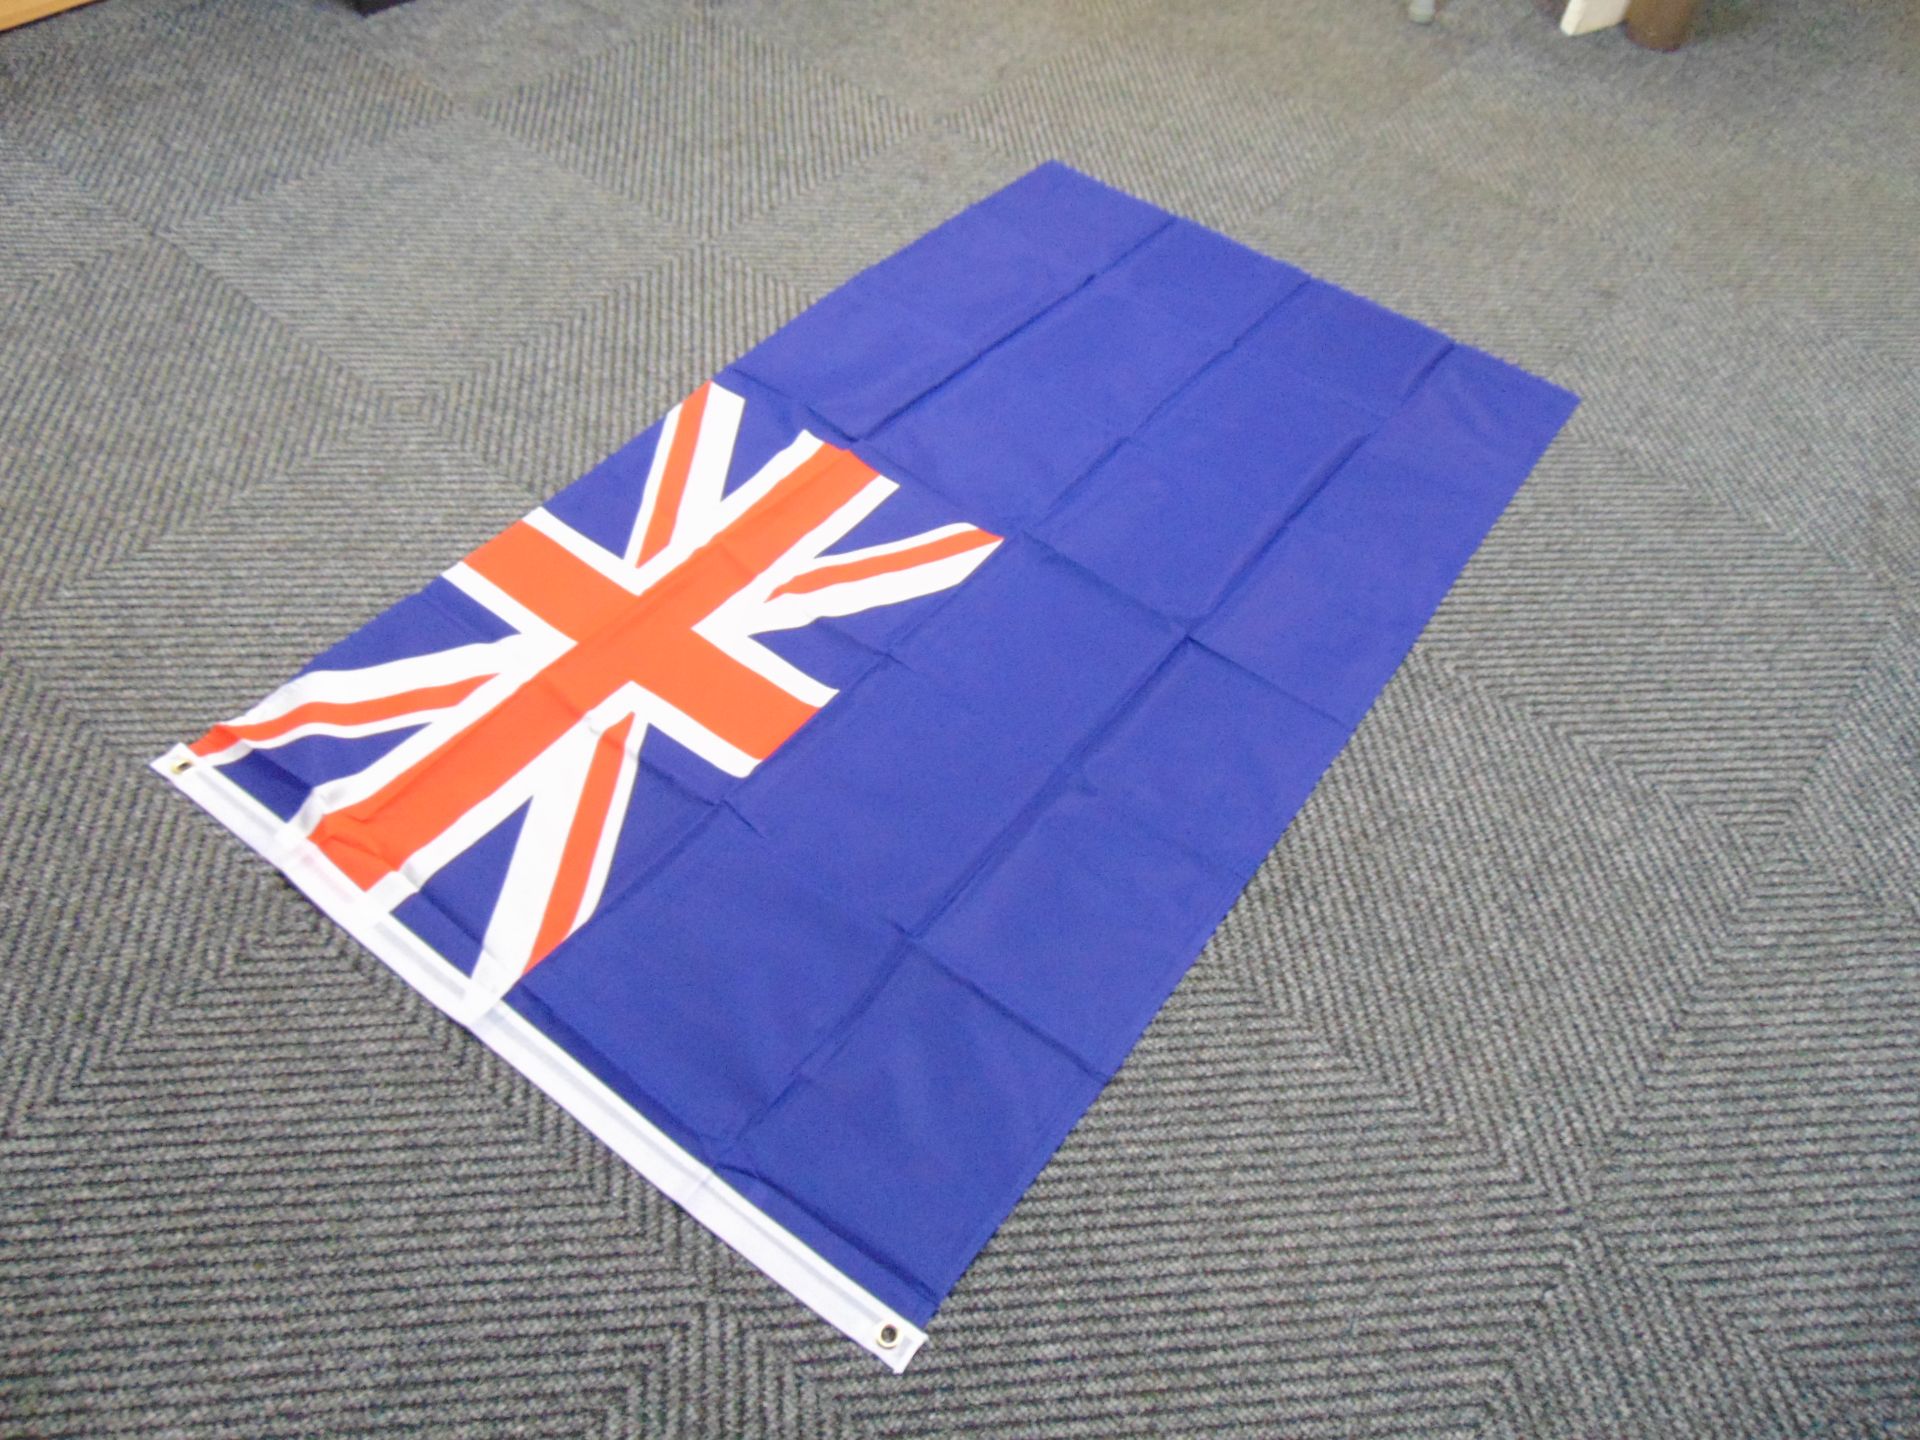 Blue Ensign Flag - 5ft x 3ft with Metal Eyelets. - Image 6 of 6